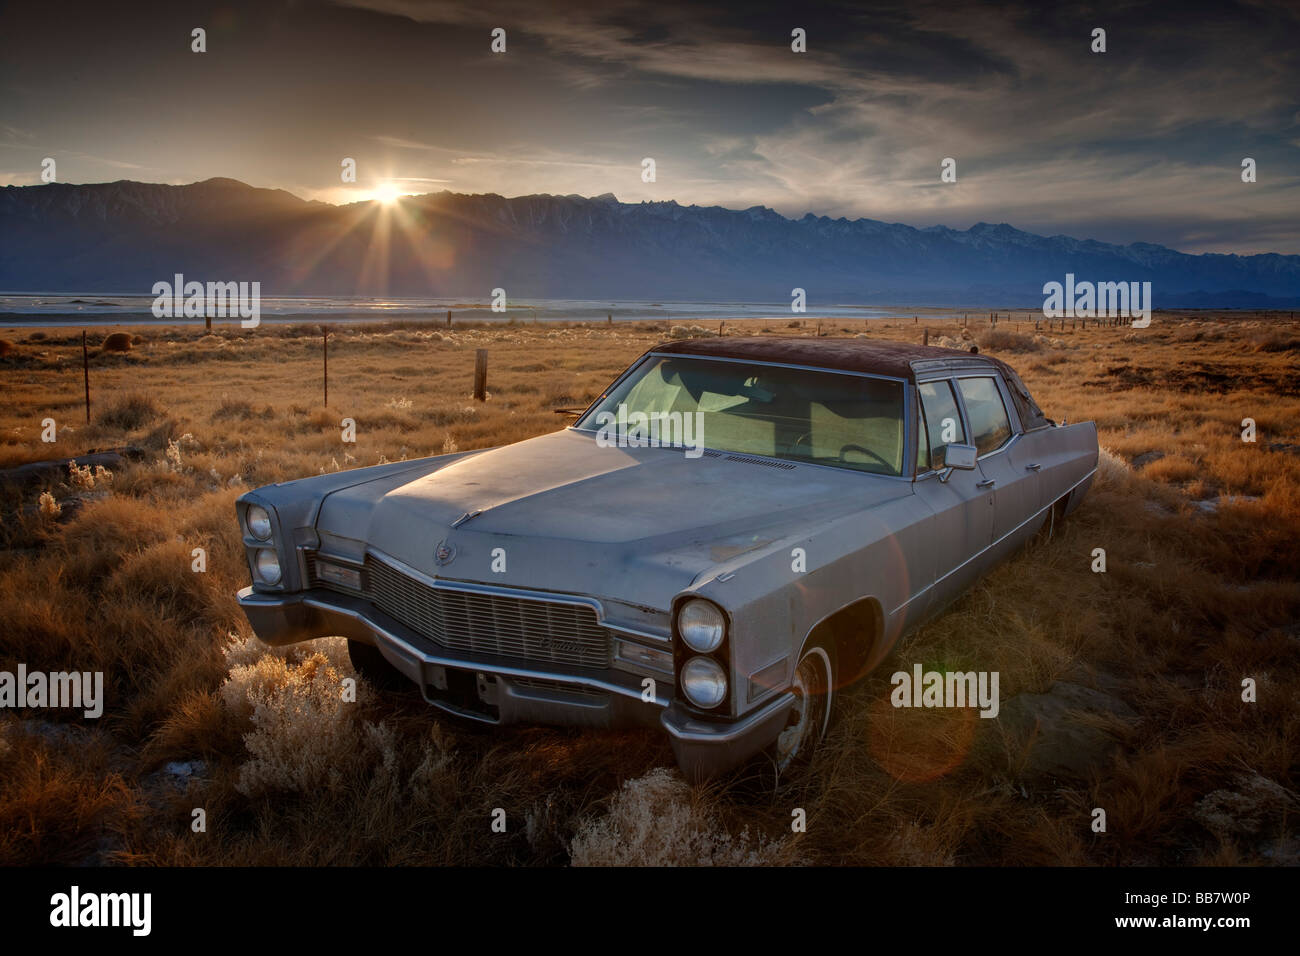 Abandoned Cadillac automobile in field near Mount Whitney, Keeler near Lone Pine in California USA Stock Photo